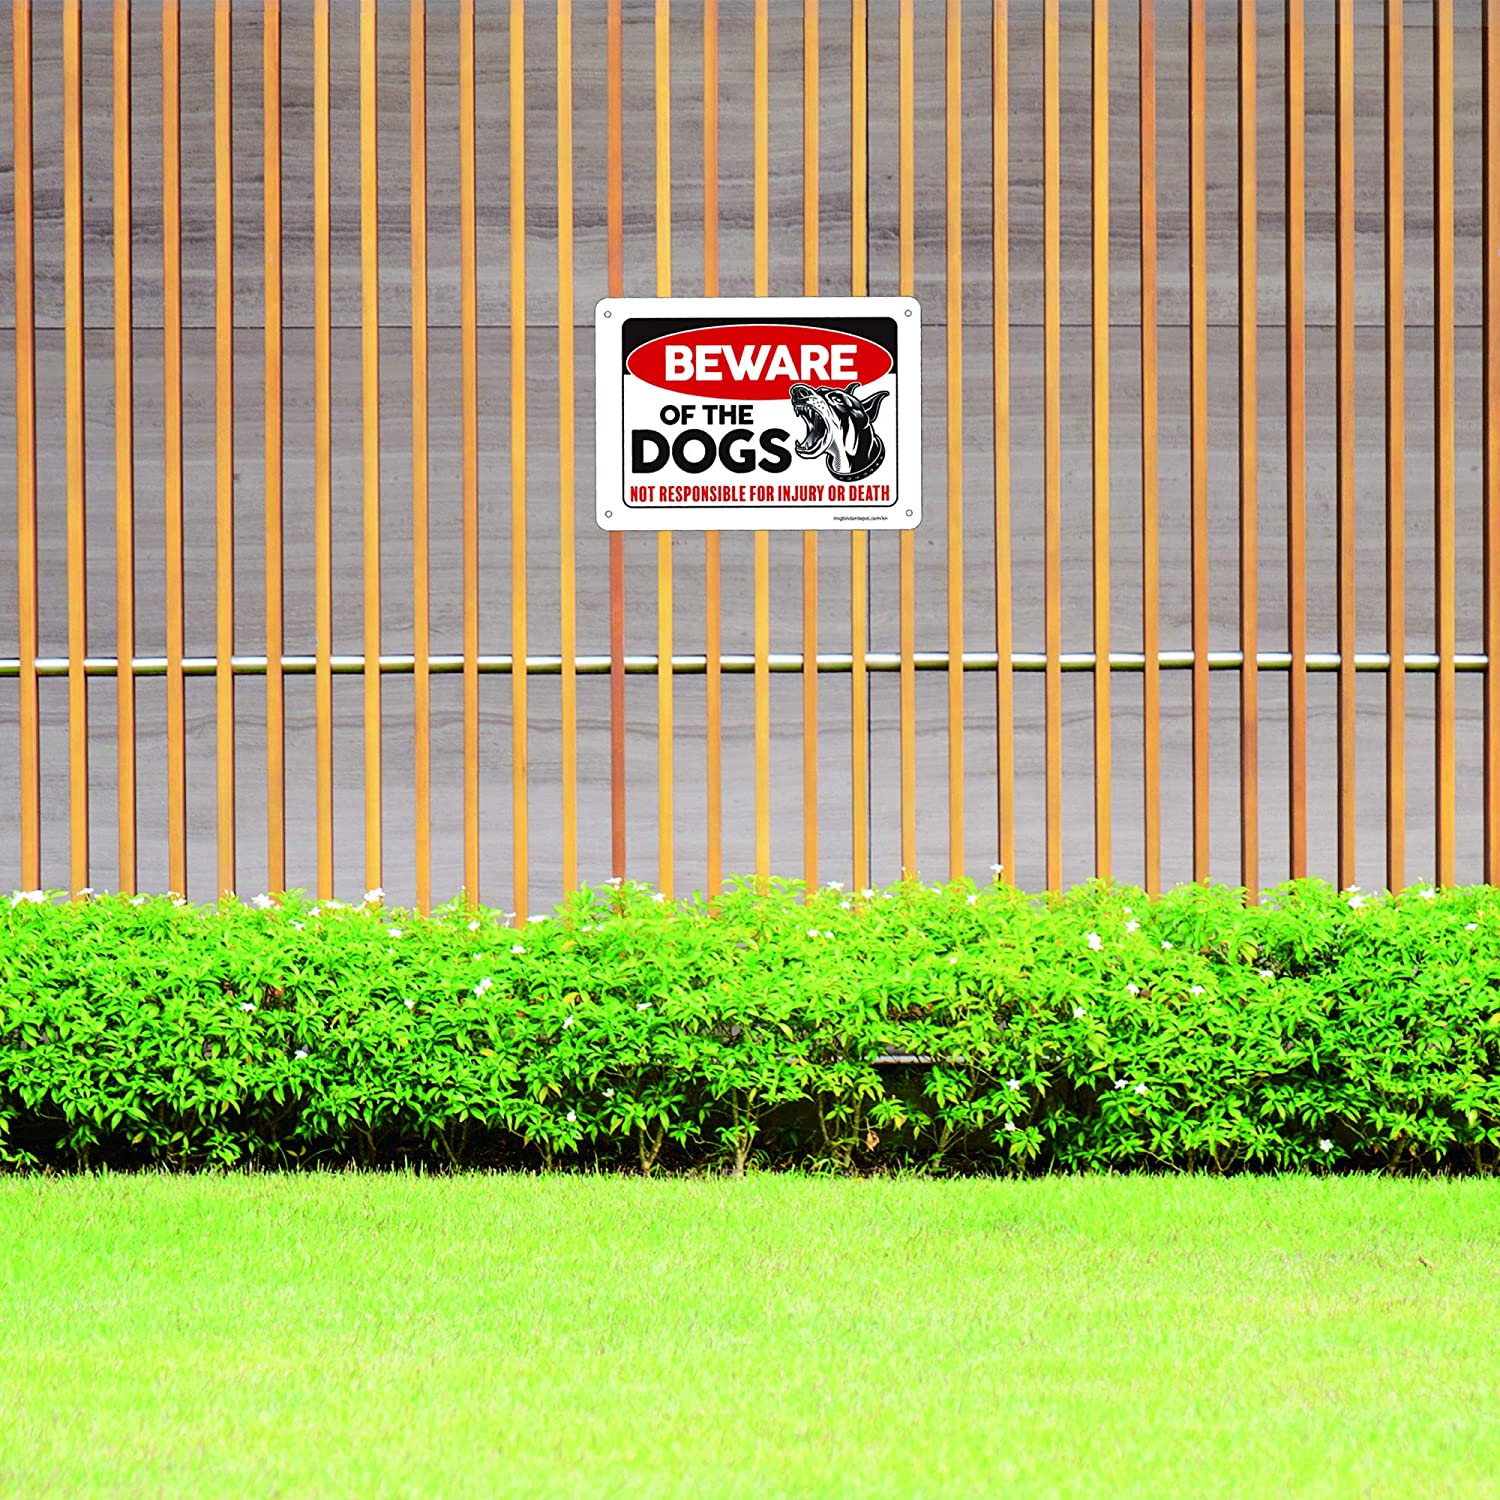 "Beware of dogs" sign